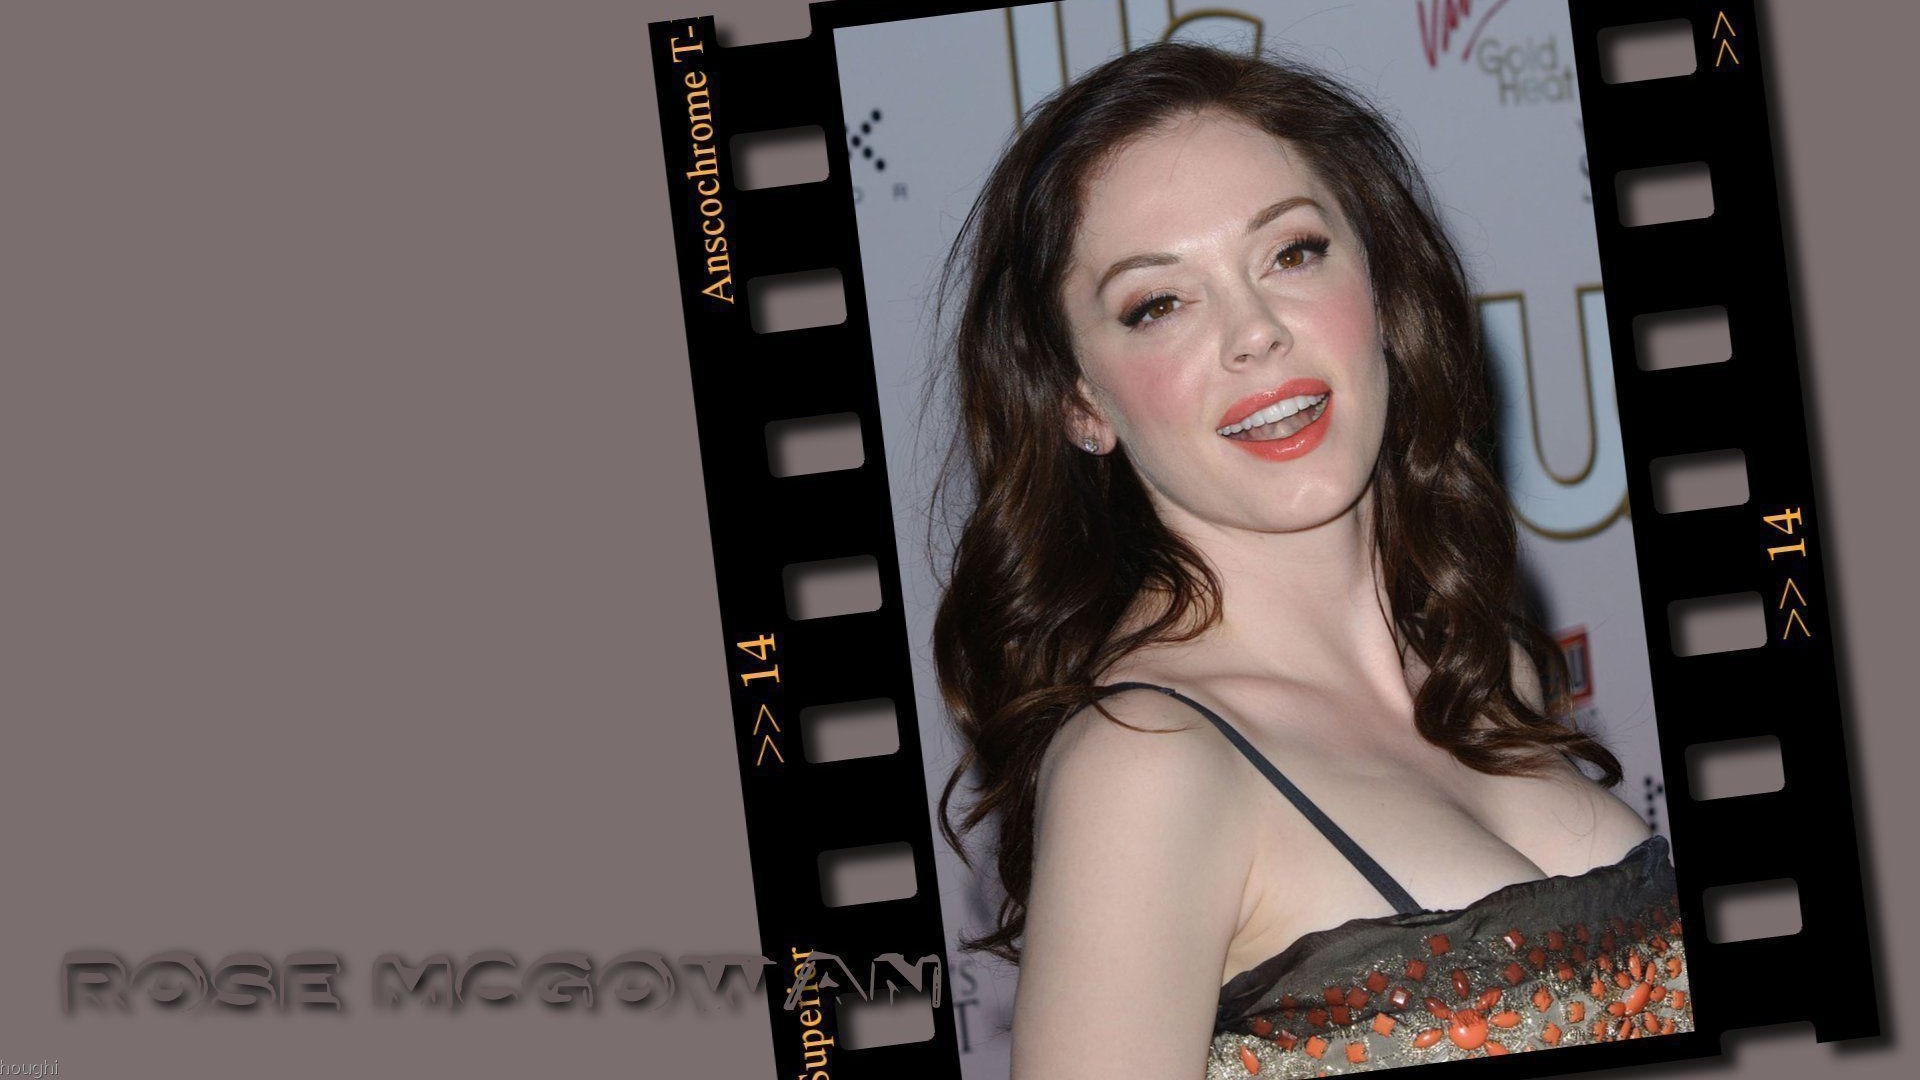 Rose McGowan #002 - 1920x1080 Wallpapers Pictures Photos Images